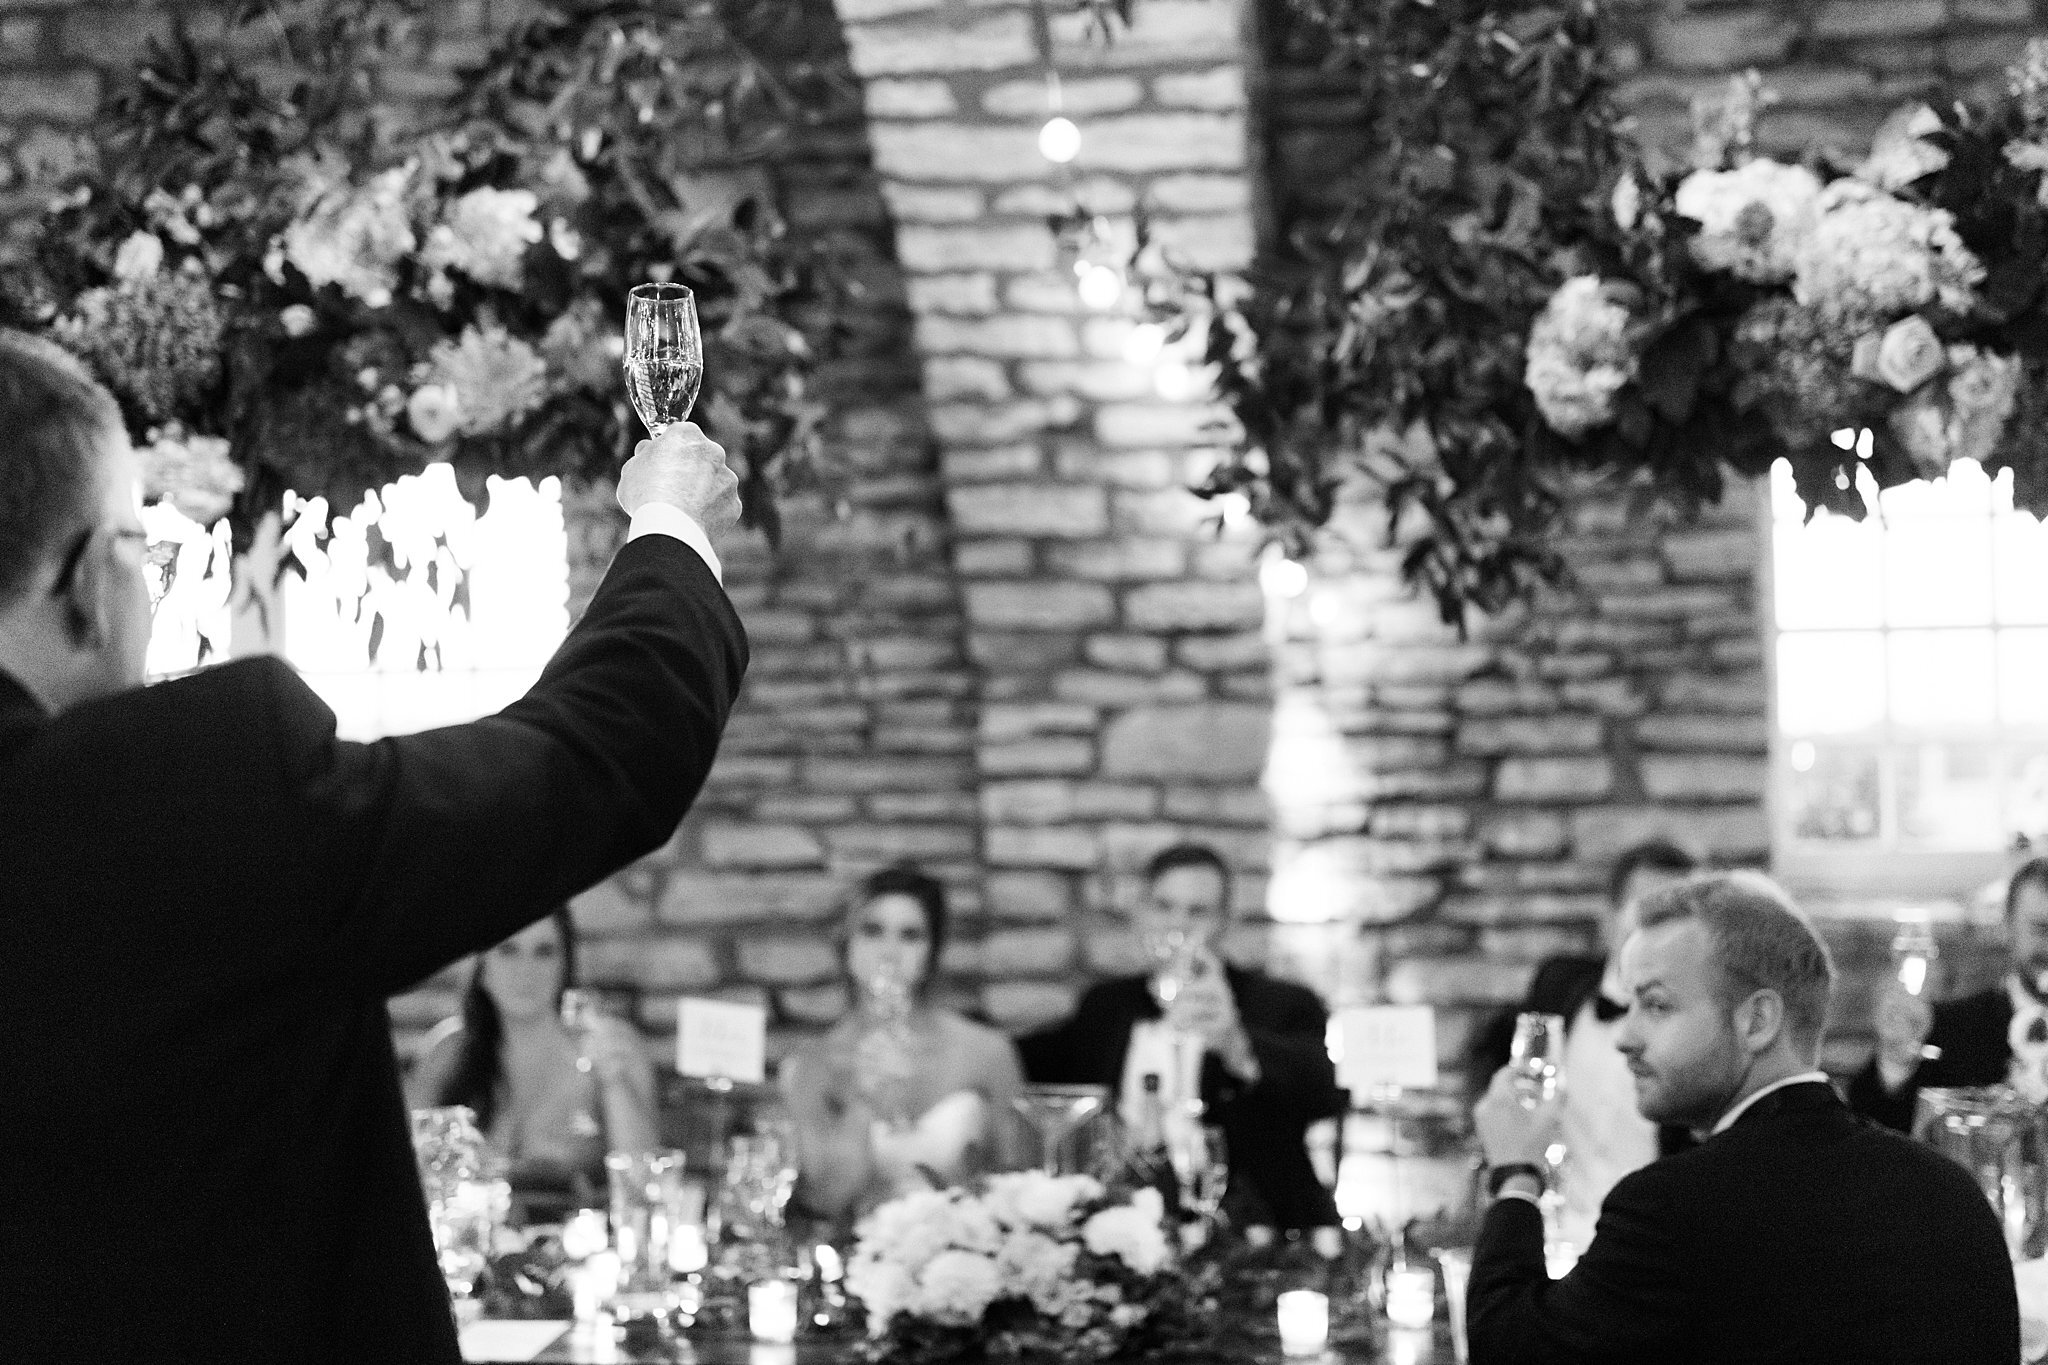  Man on microphone provides toast to bride and groom at head table. 